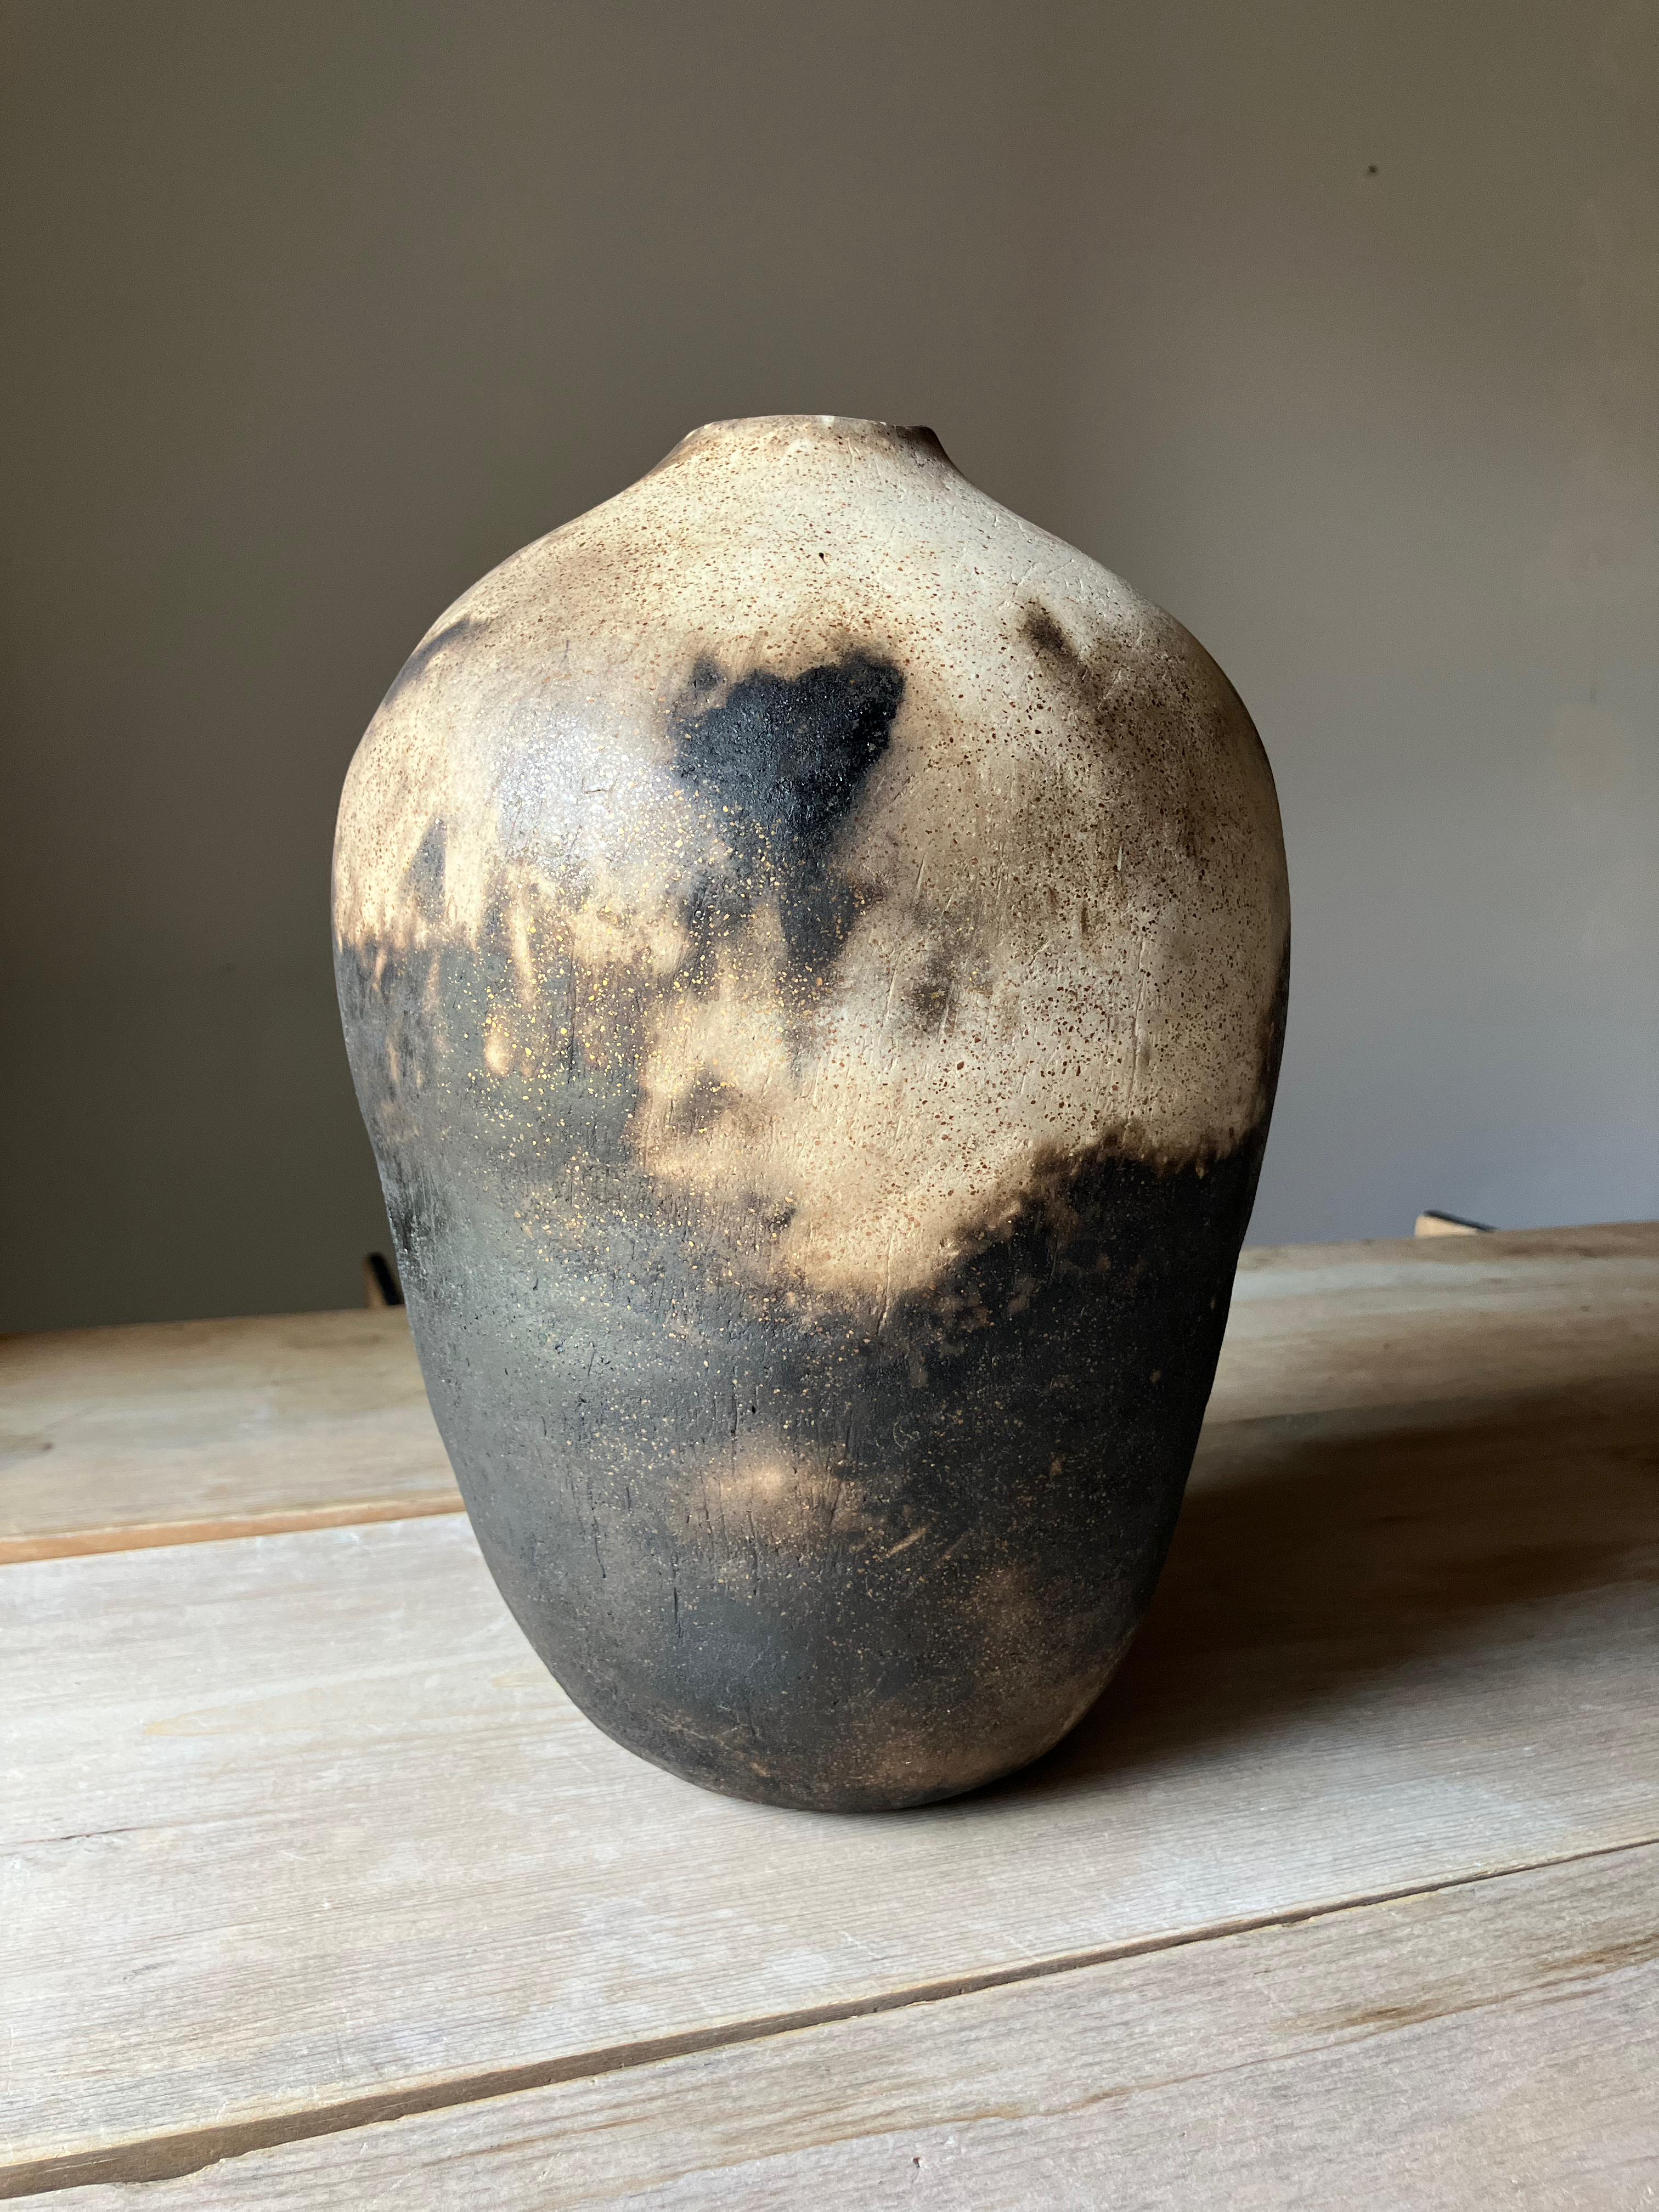 A ceramic bottle made by my hand, scraped and coiled into shape from micaceaous white earthenware clay and then burnished with leather and a water worn stone until it shines like silk. 

The work is fired multiple times, the final in a primitive